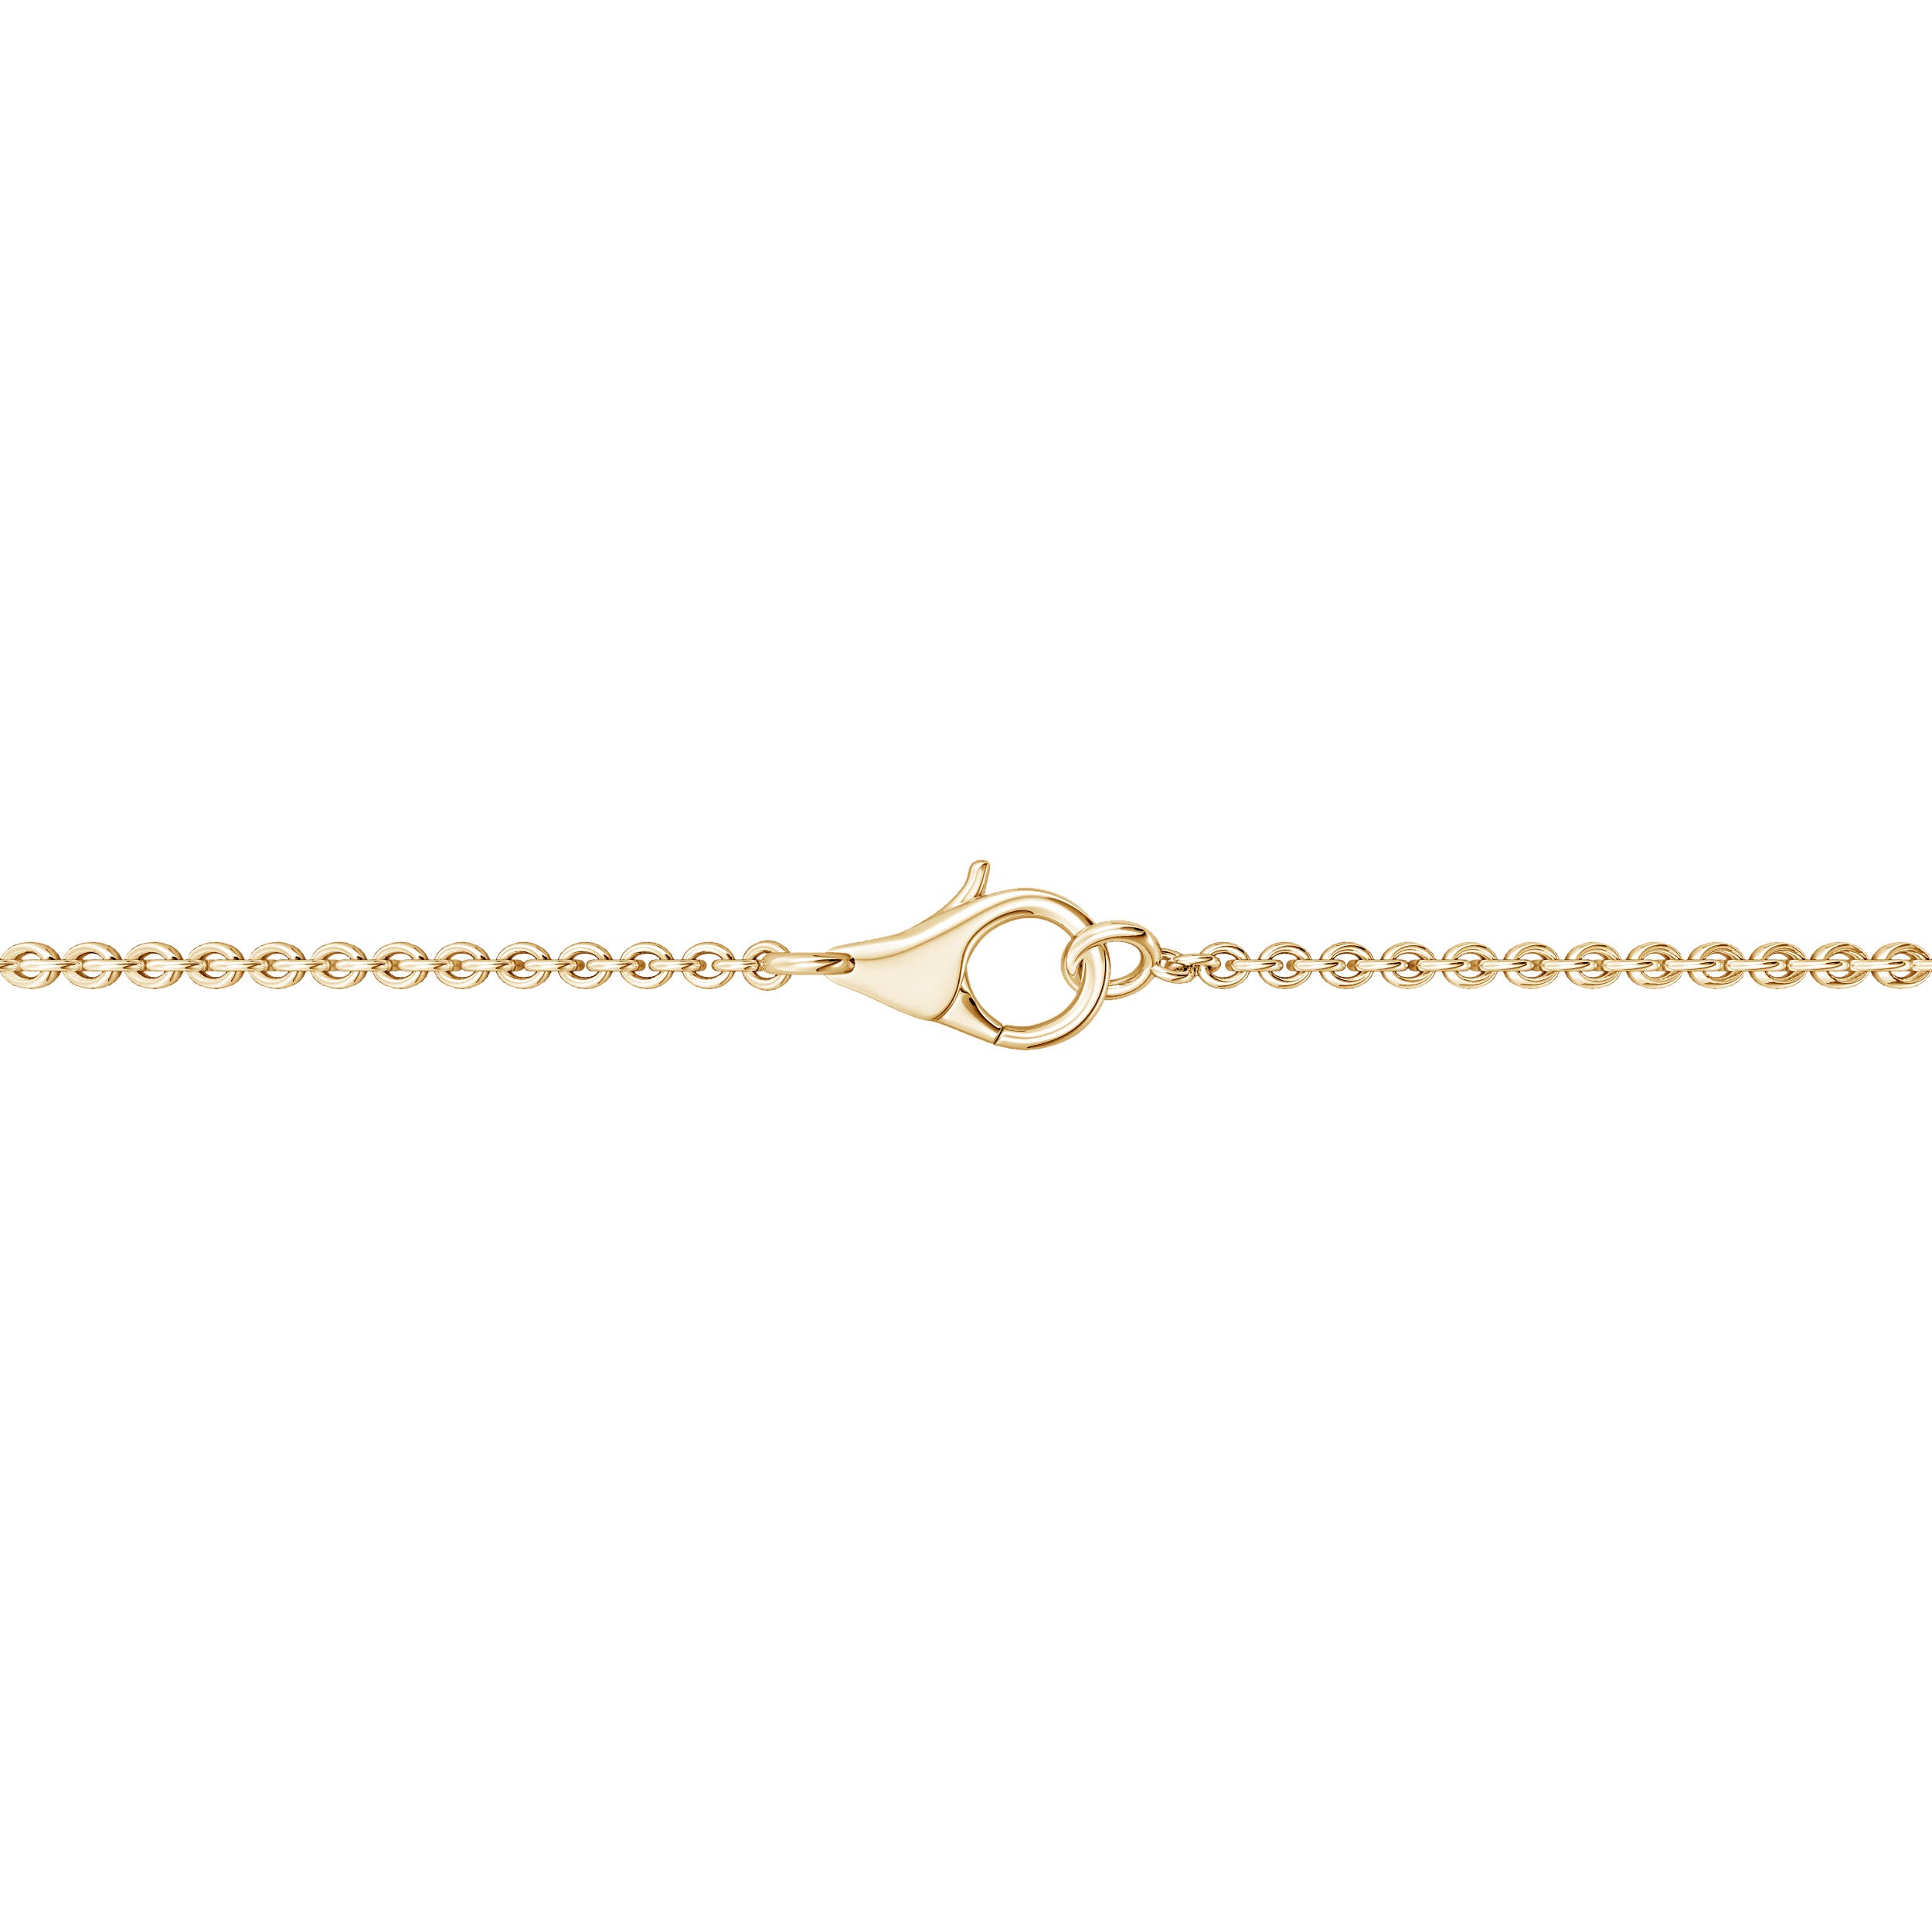 K, I3 / 0.04 CT / 14 KT Yellow Gold